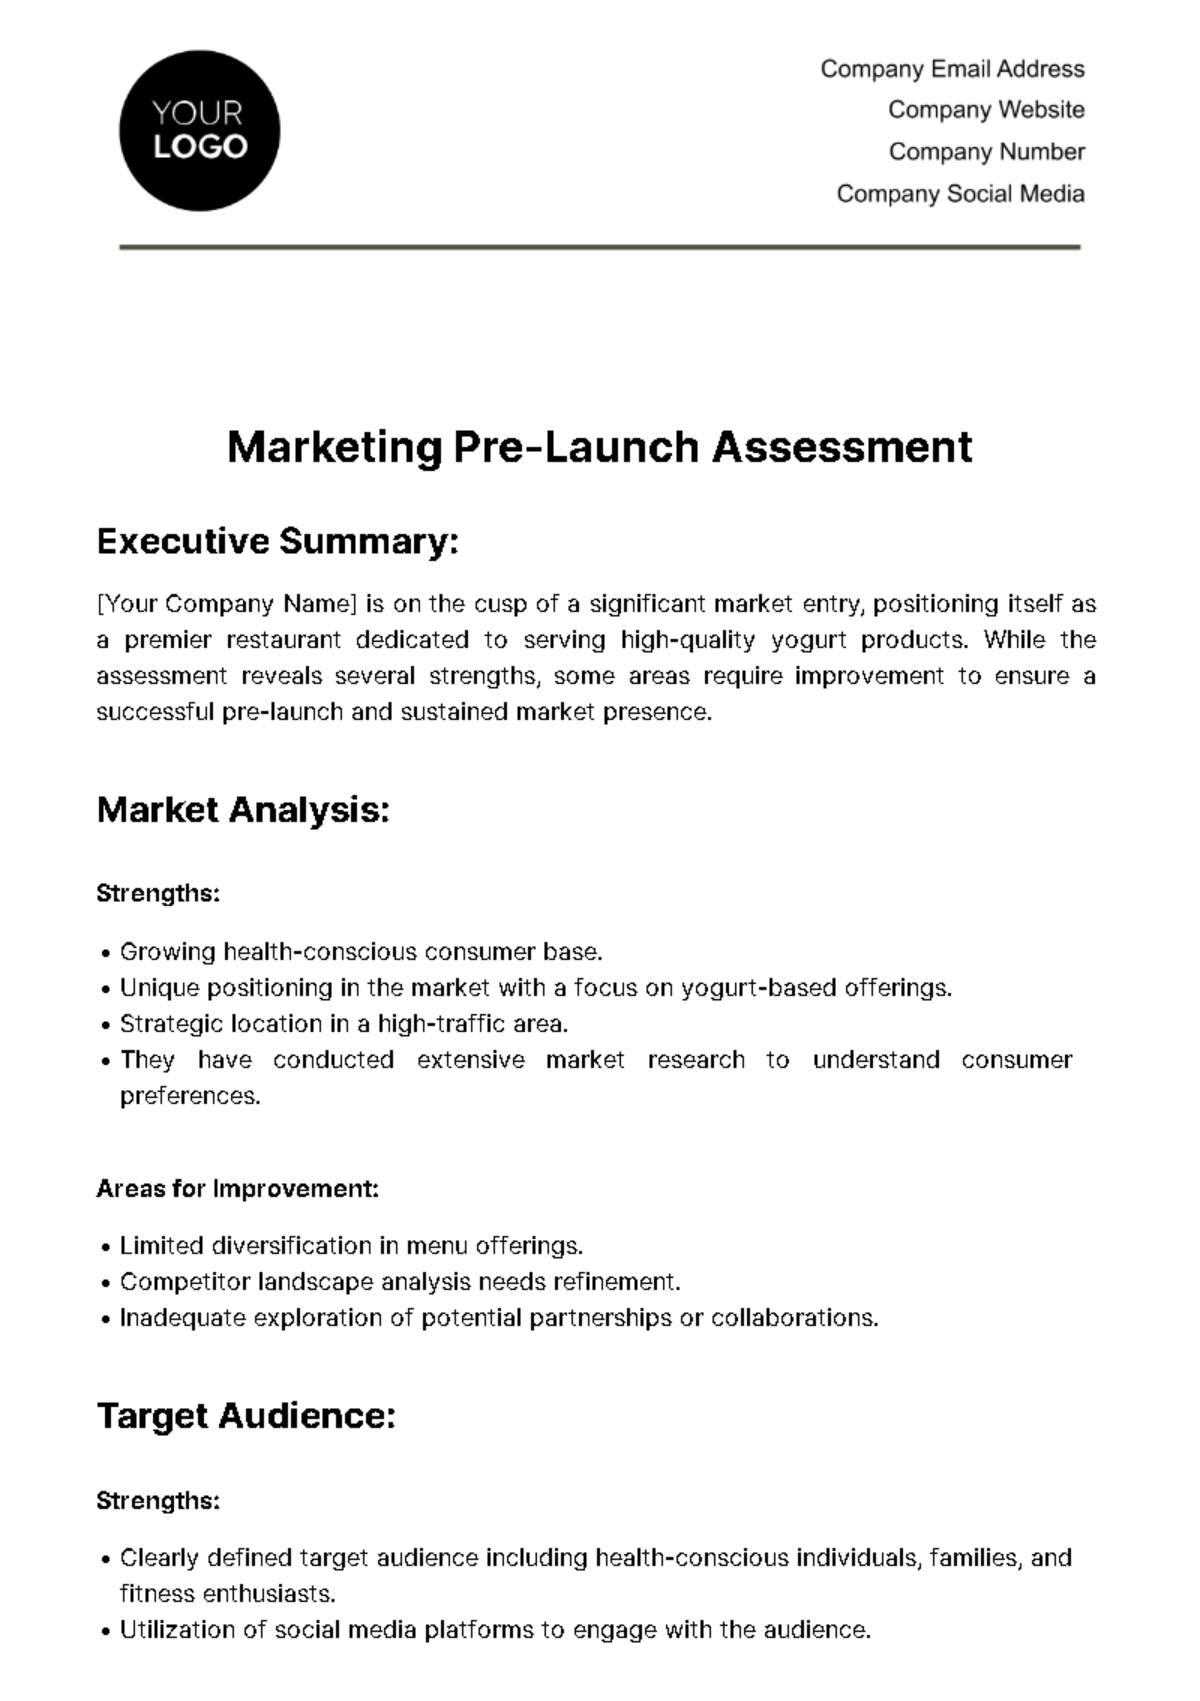 Free Marketing Pre-launch Assessment Template